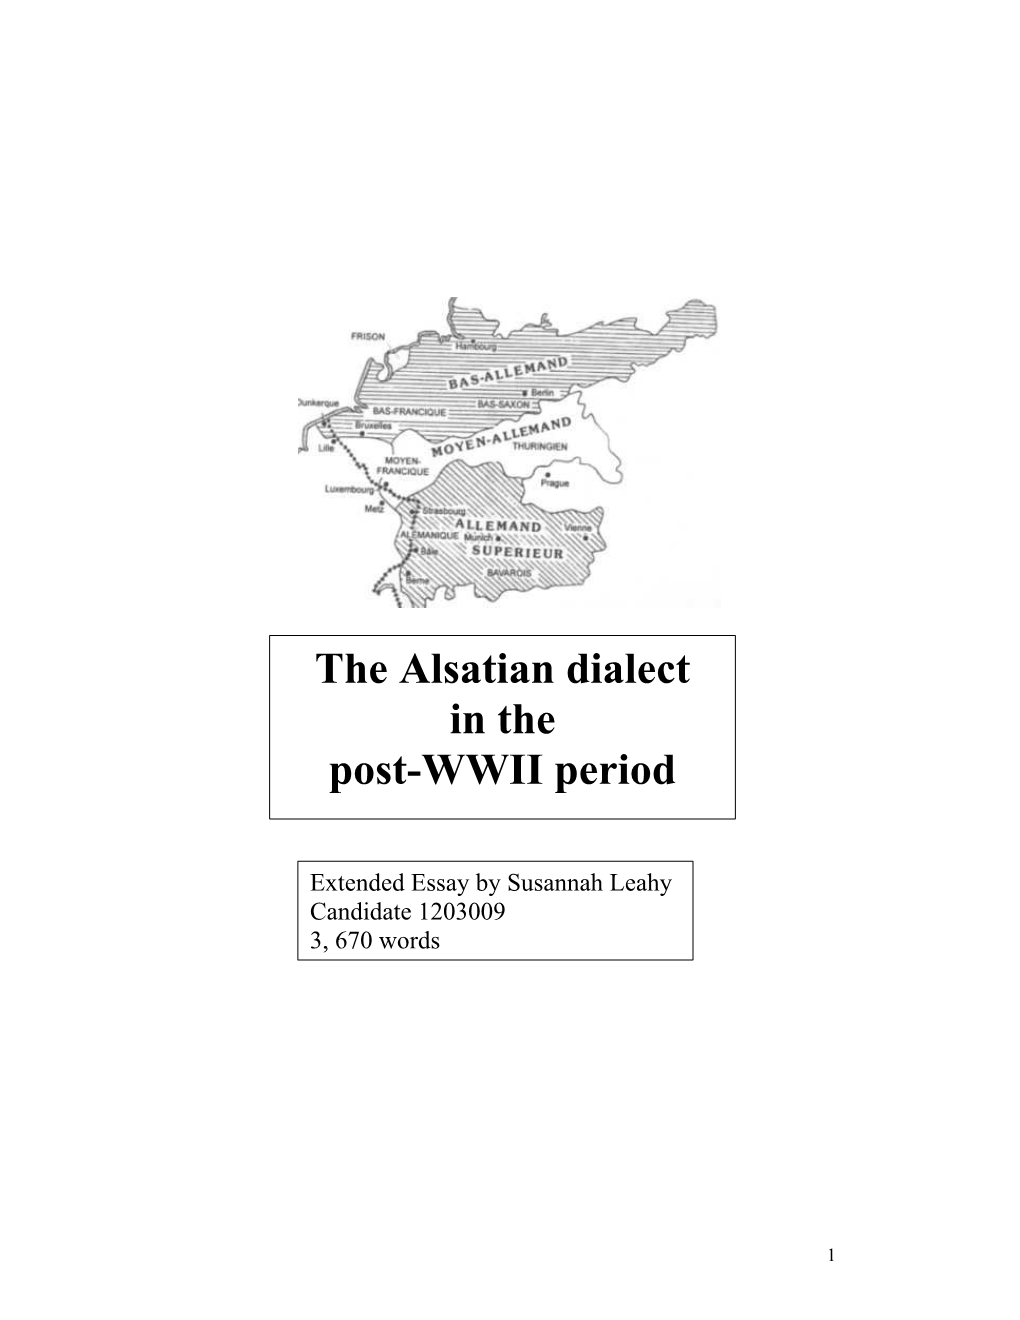 The Alsatian Dialect in the Post-WWII Period